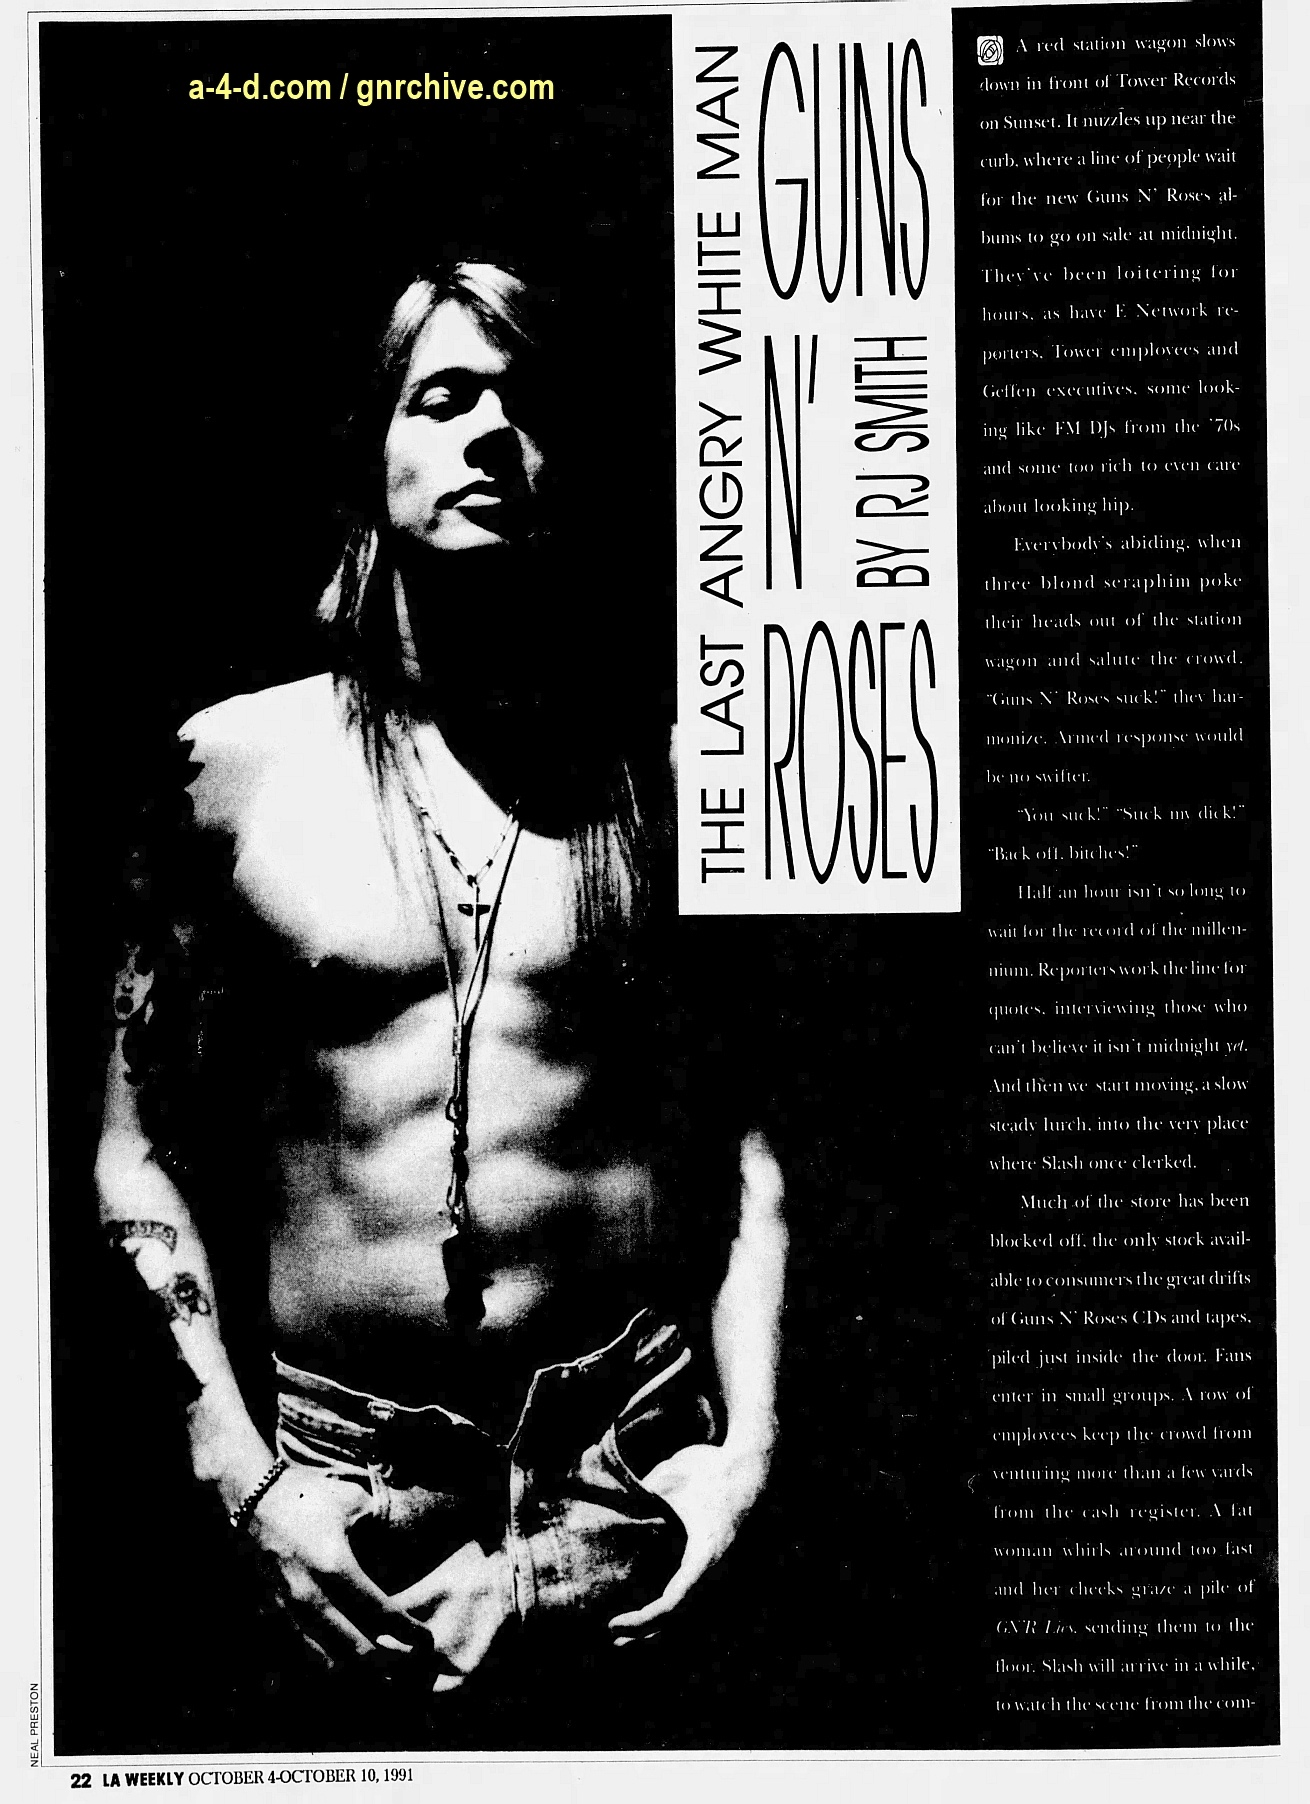 1991.10.04 - L.A. Weekly - Guns N' Roses: Up From Nowhere 1991_112